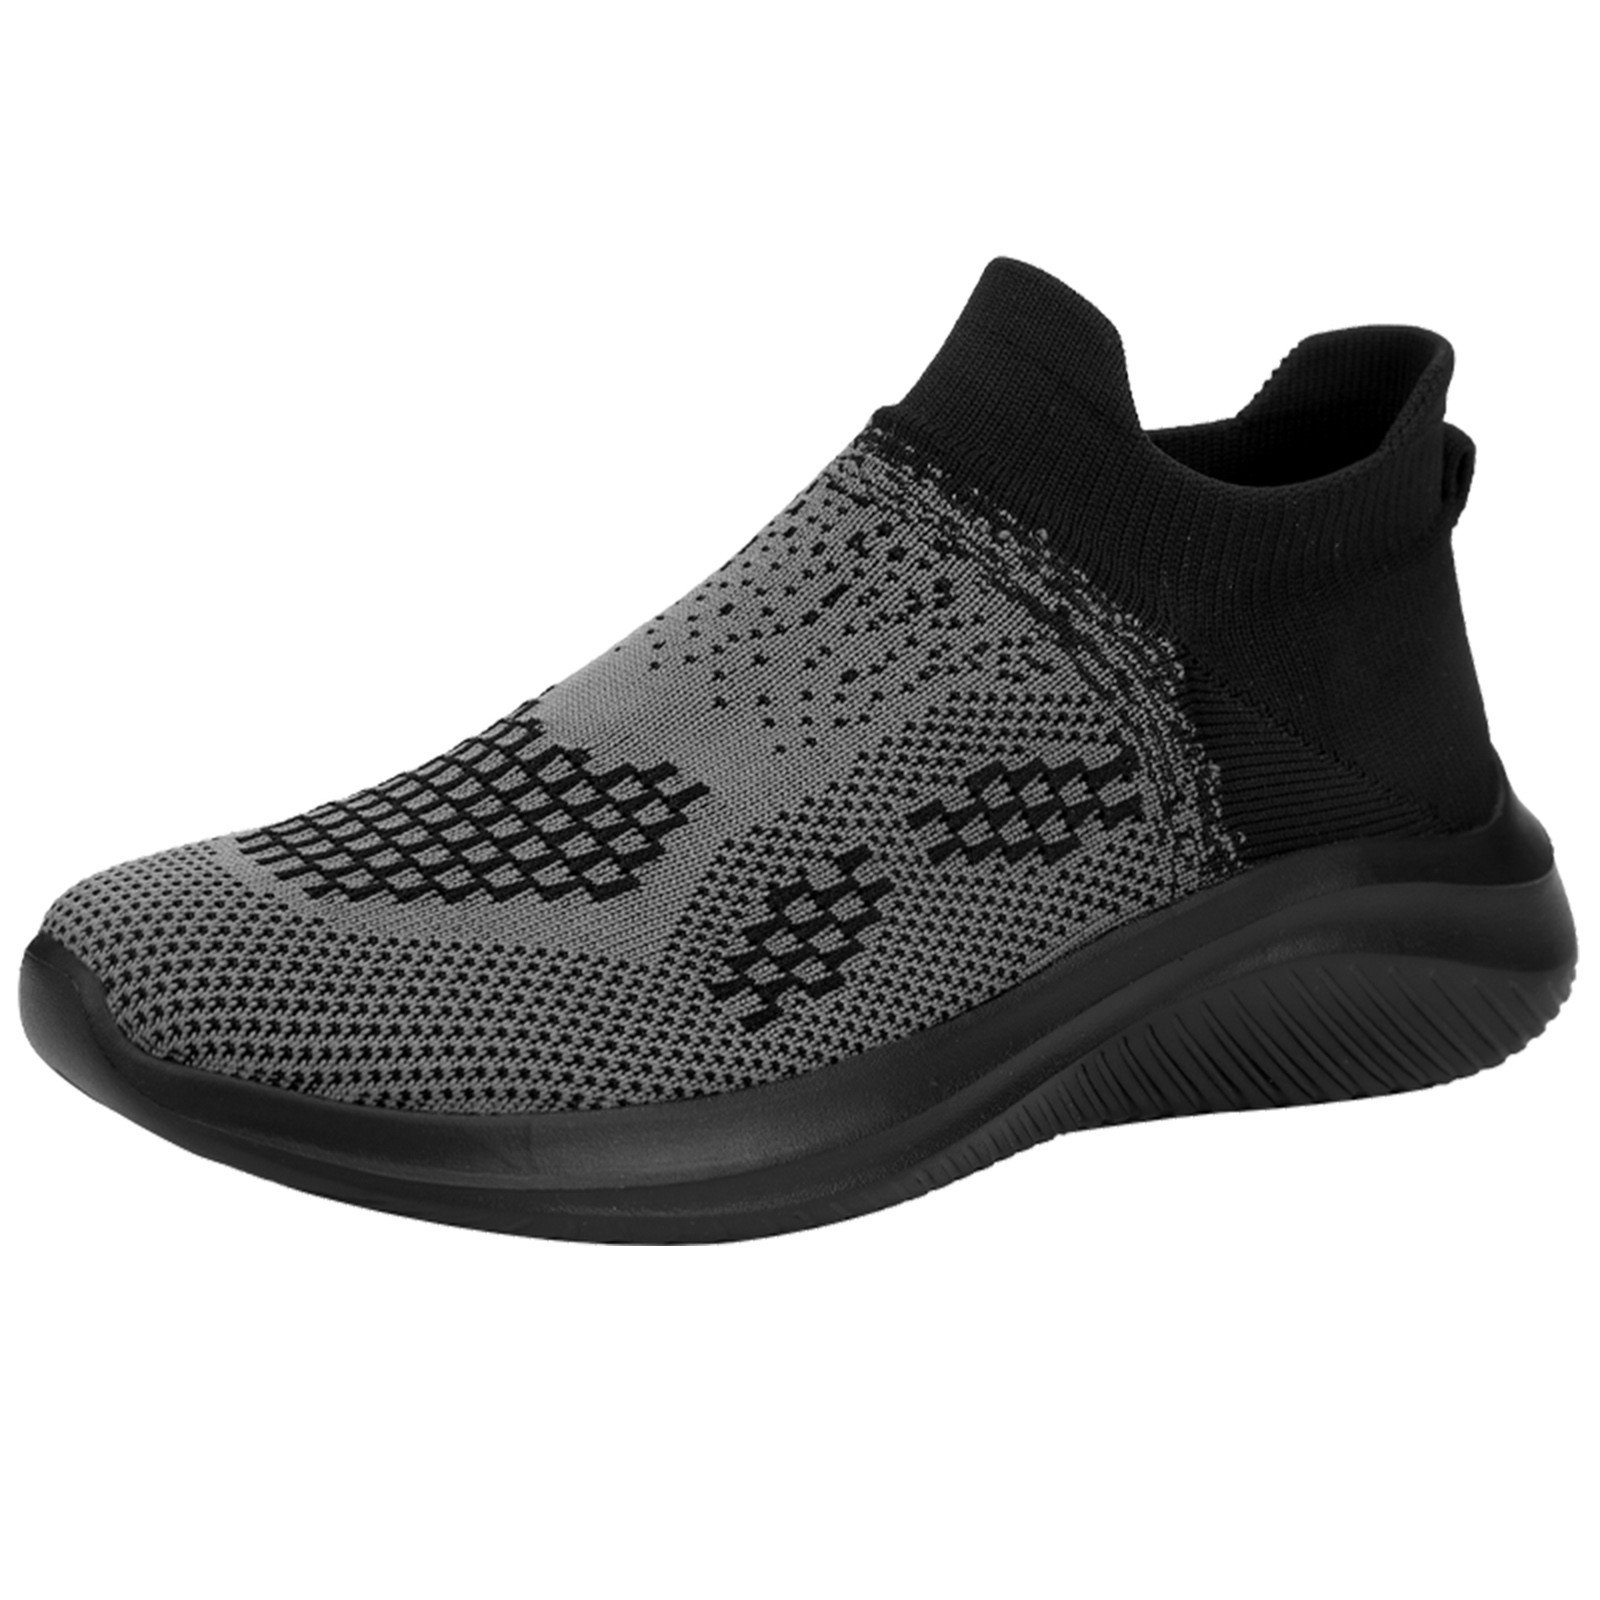 CBGELRT Shoes for Men Casual Men's Sneakers Work Tennis Shoes for Mens Couple Shoes Casual Shoes Slip On Breathable Fashion Flat Casual Shoes Walking Sneakers Male Gray 40 - image 1 of 6